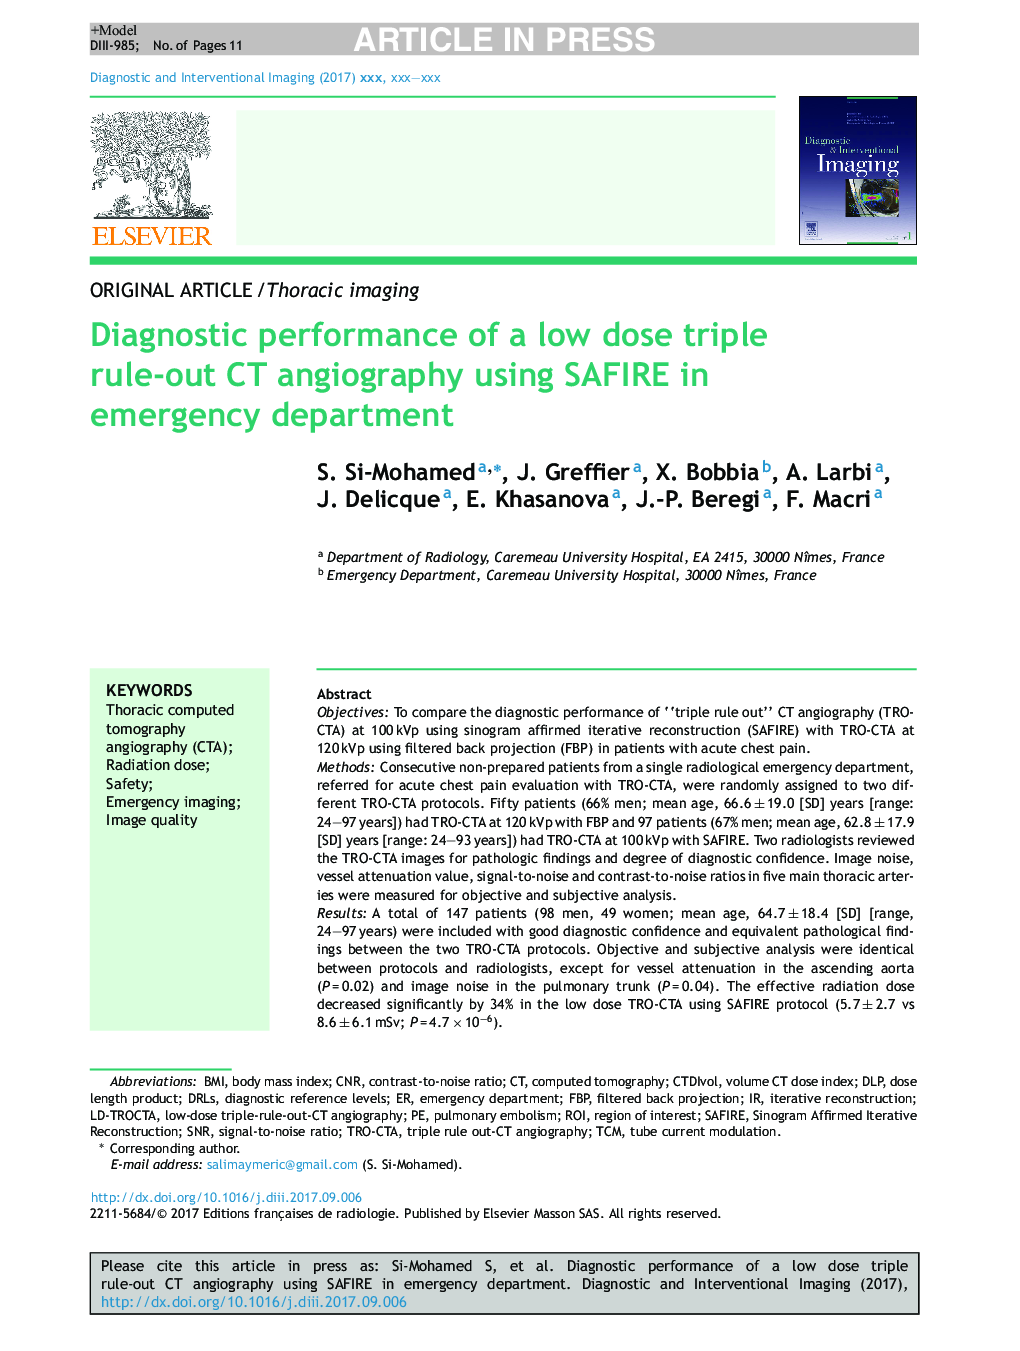 Diagnostic performance of a low dose triple rule-out CT angiography using SAFIRE in emergency department